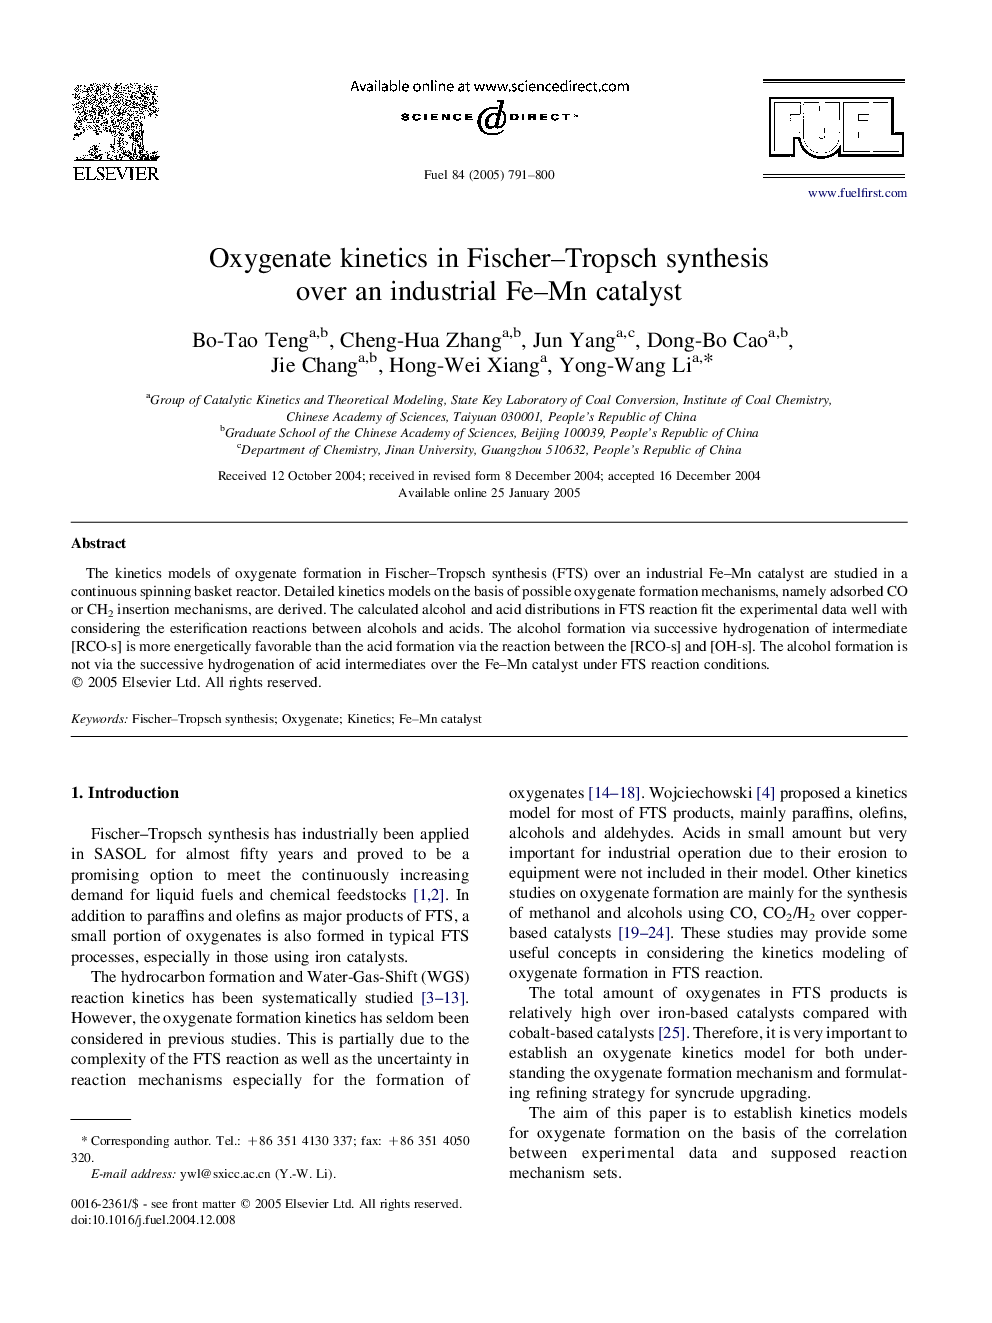 Oxygenate kinetics in Fischer-Tropsch synthesis over an industrial Fe-Mn catalyst